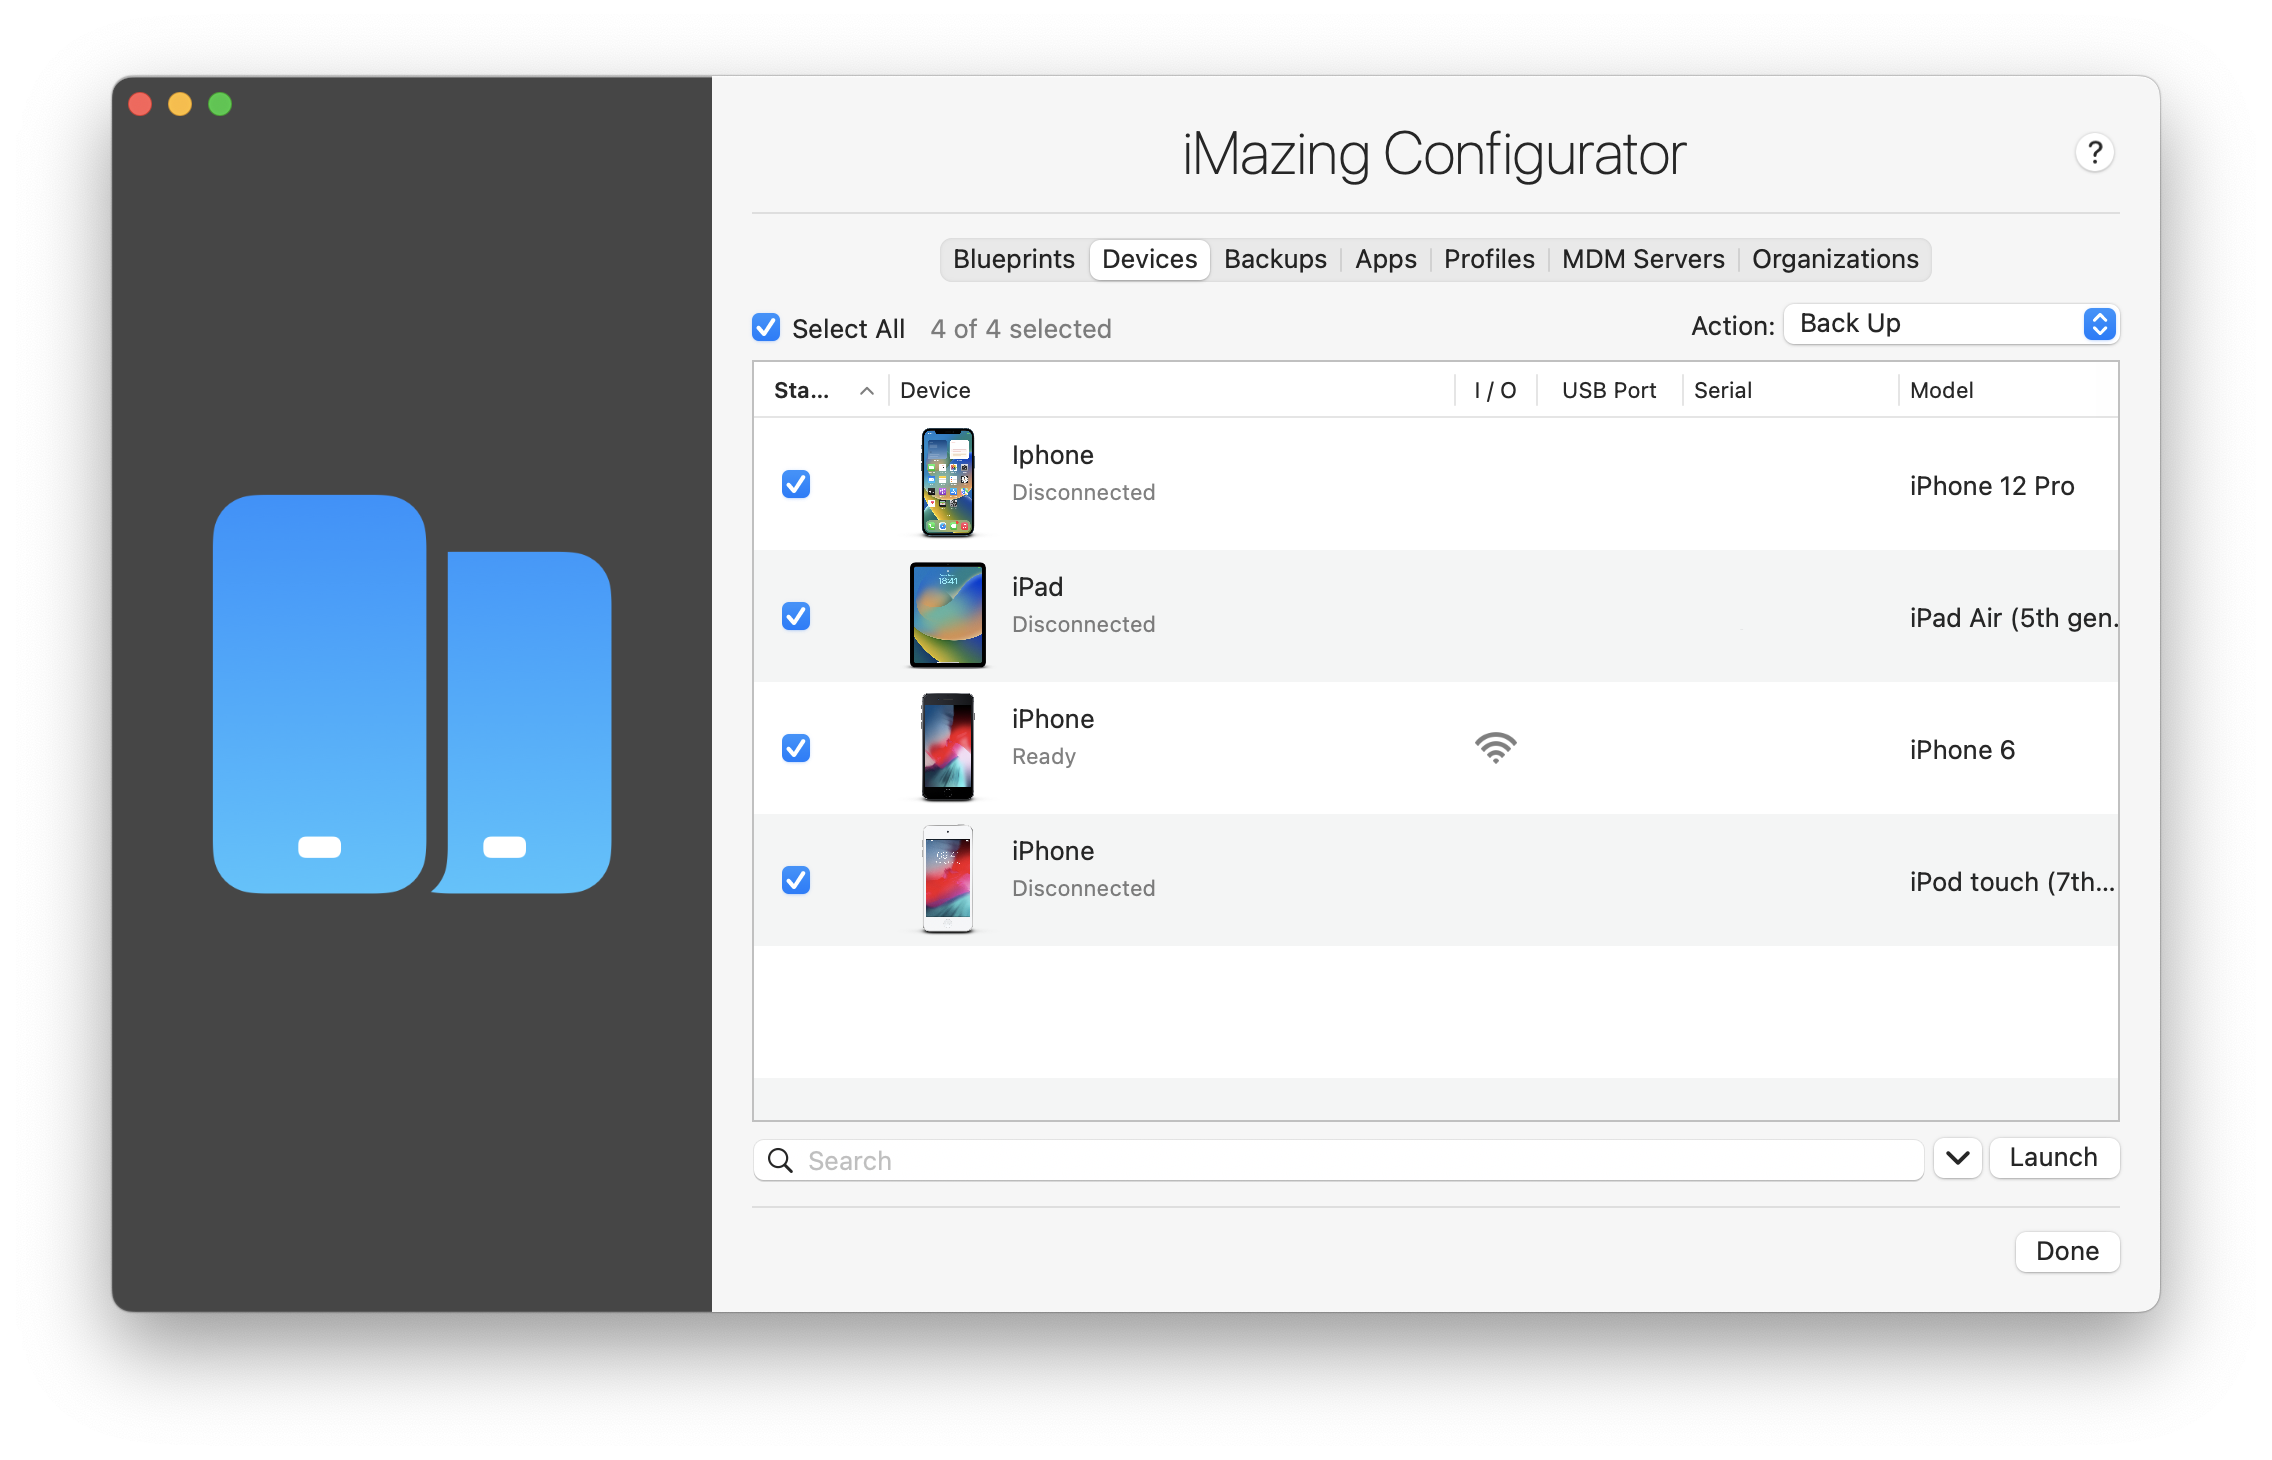 iMazing Configurator Library View, Devices Tab